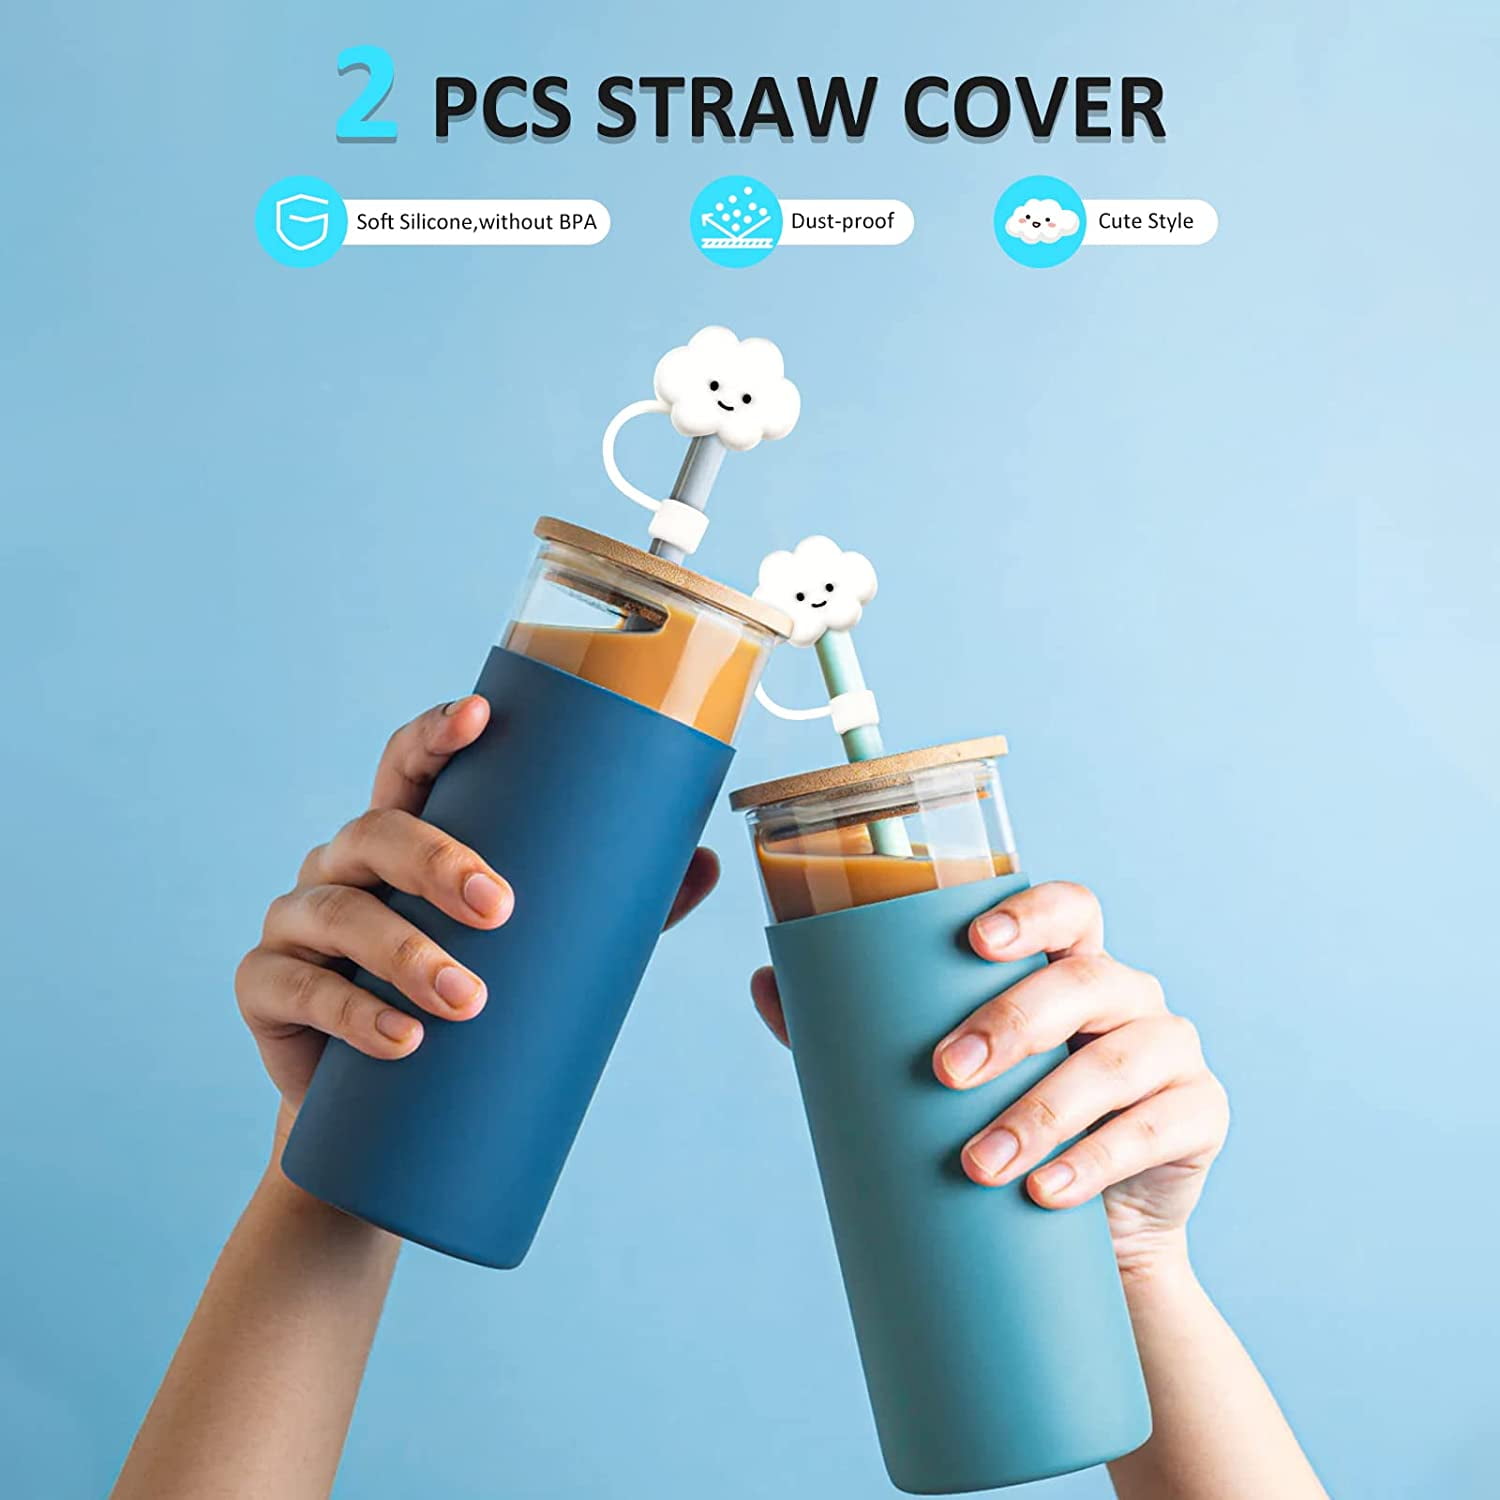 2pcs Straw Tips Cover Straw Covers Cap For Reusable Straws Straw Protector  Cute Holiday Style (Blue Clouds)